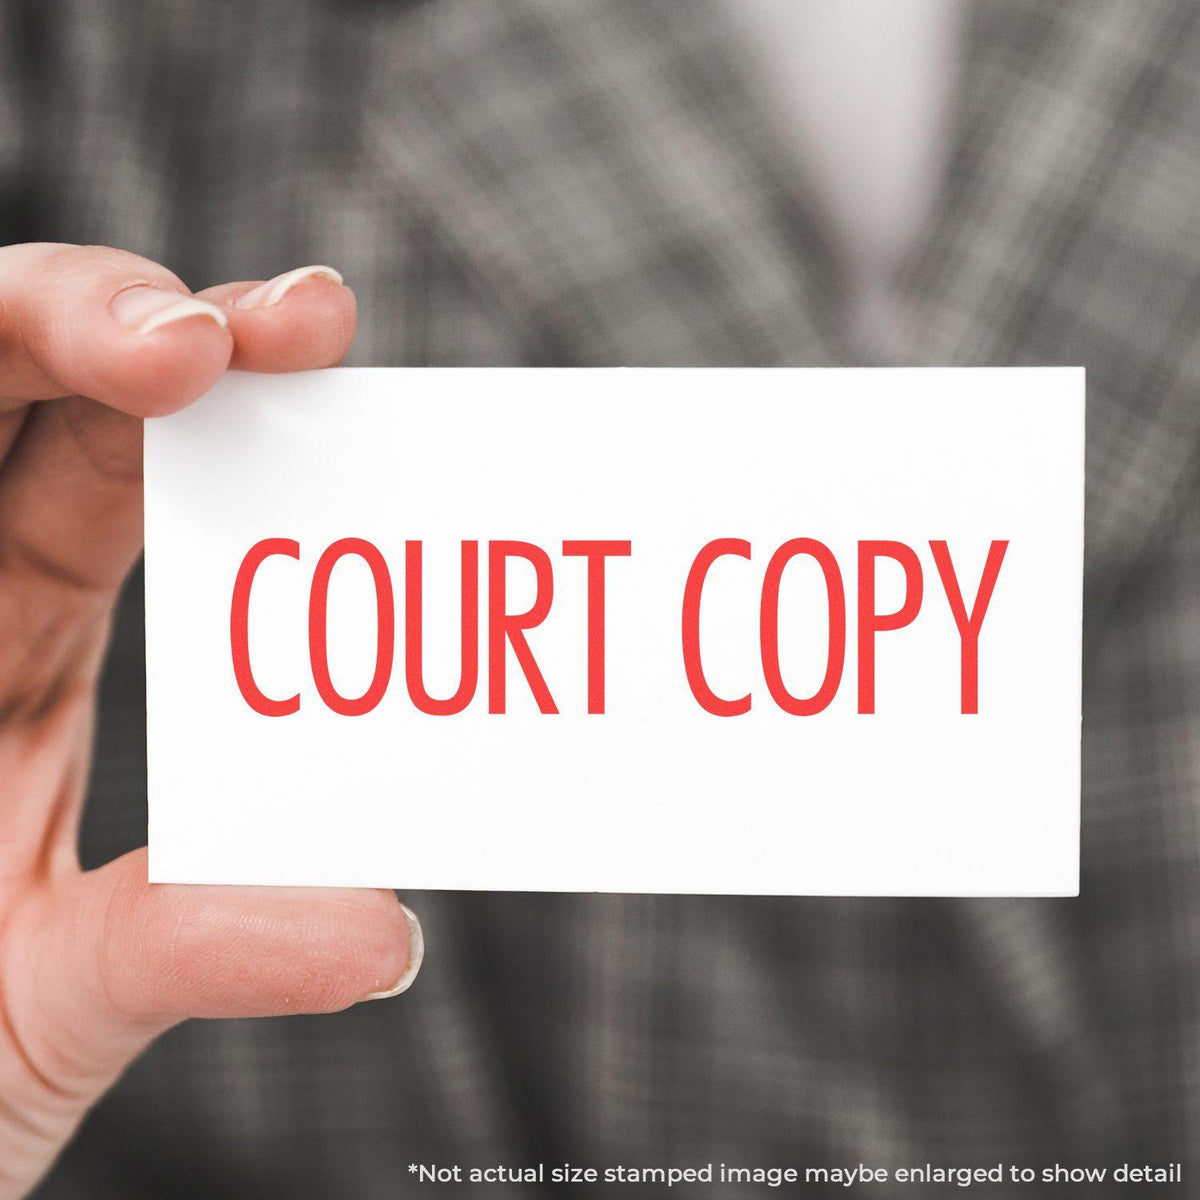 In Use Large Narrow Font Court Copy Rubber Stamp Image